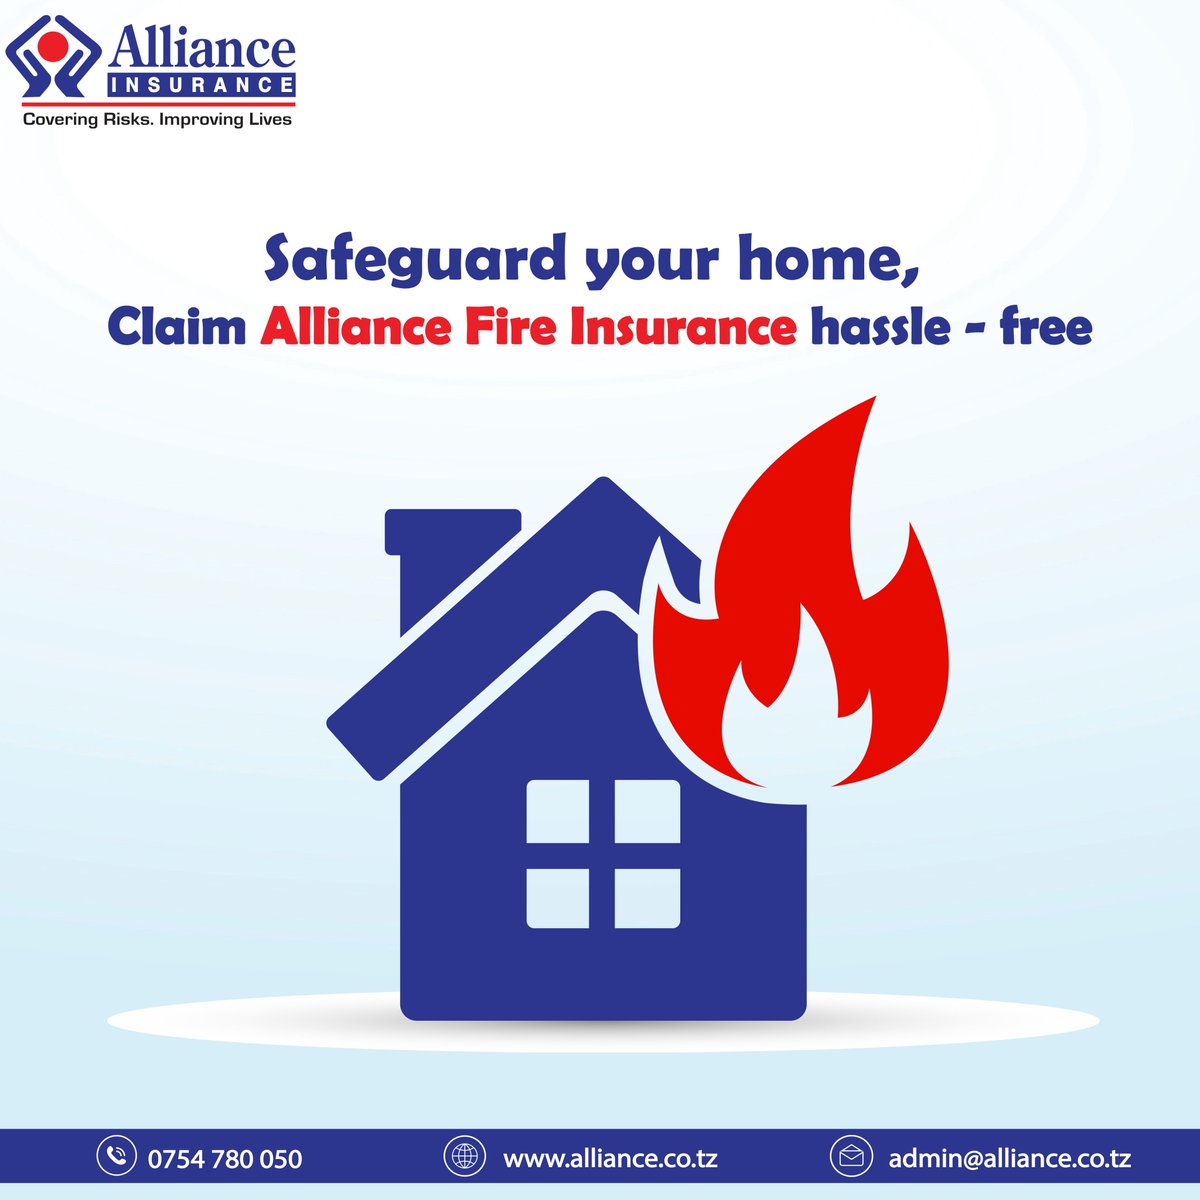 #allianceinsurance #fireinsurance #alliancefireinsurance #tanzania #daressalaam #insuranceintanzania #insurancedaressalaam #coveringrisksimprovinglives #safety #firepolicy #coverage #fireinsurance #protection